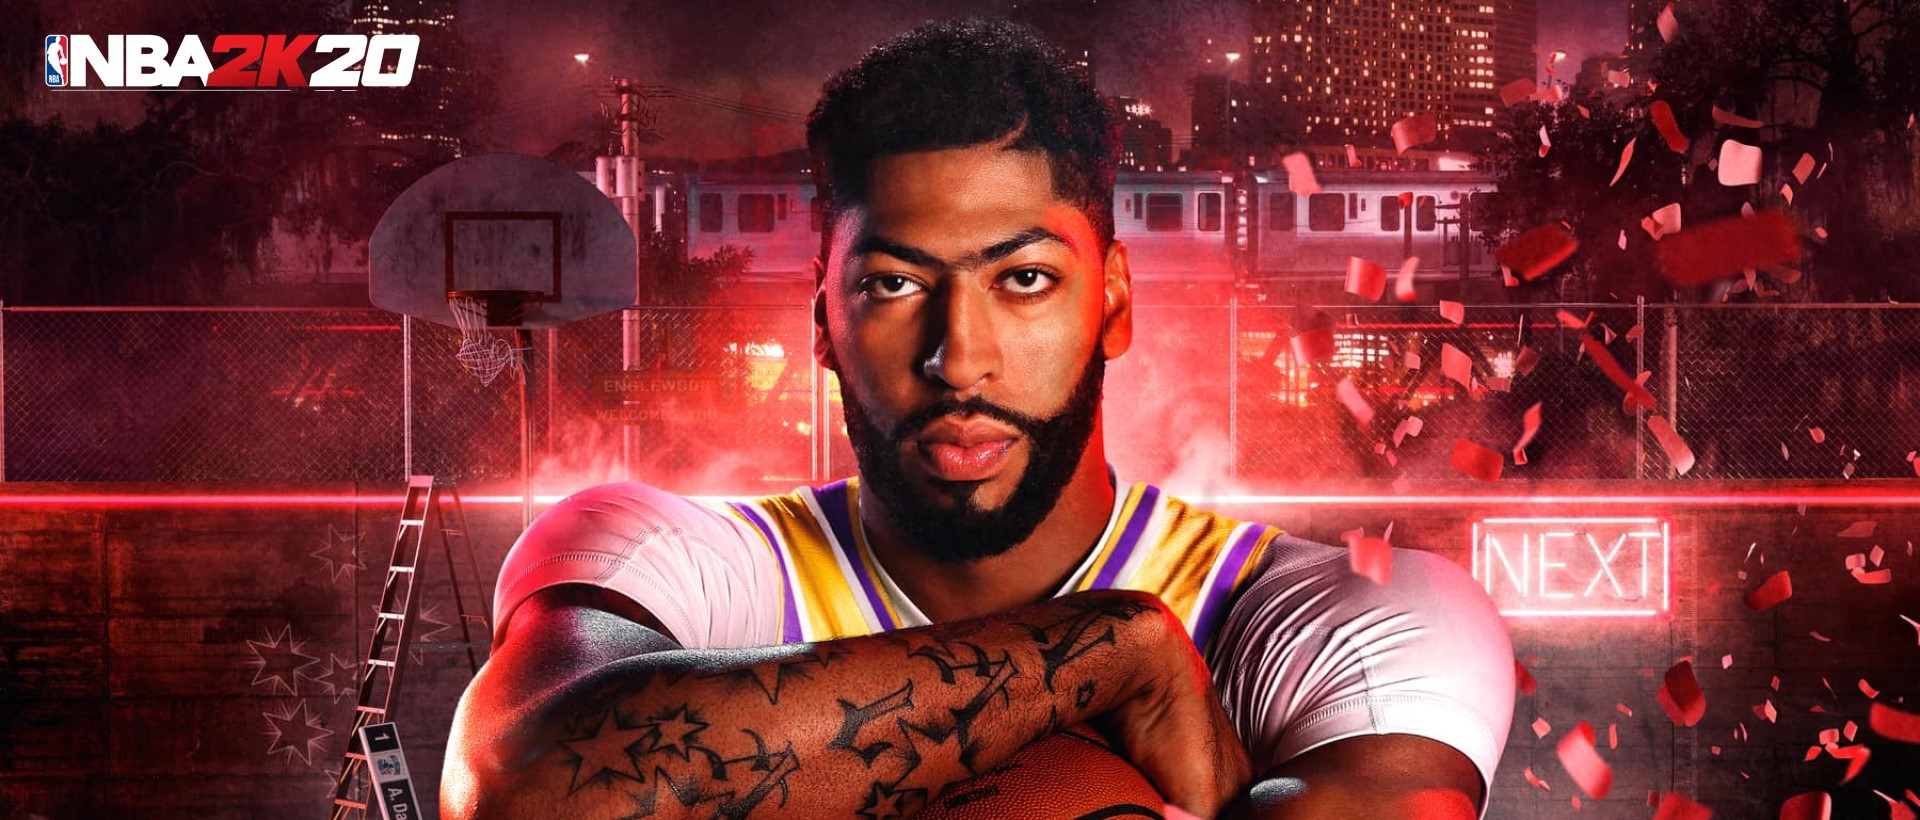 Download & Play NBA 2K20 on PC & Mac with NoxPlayer (Emulator)